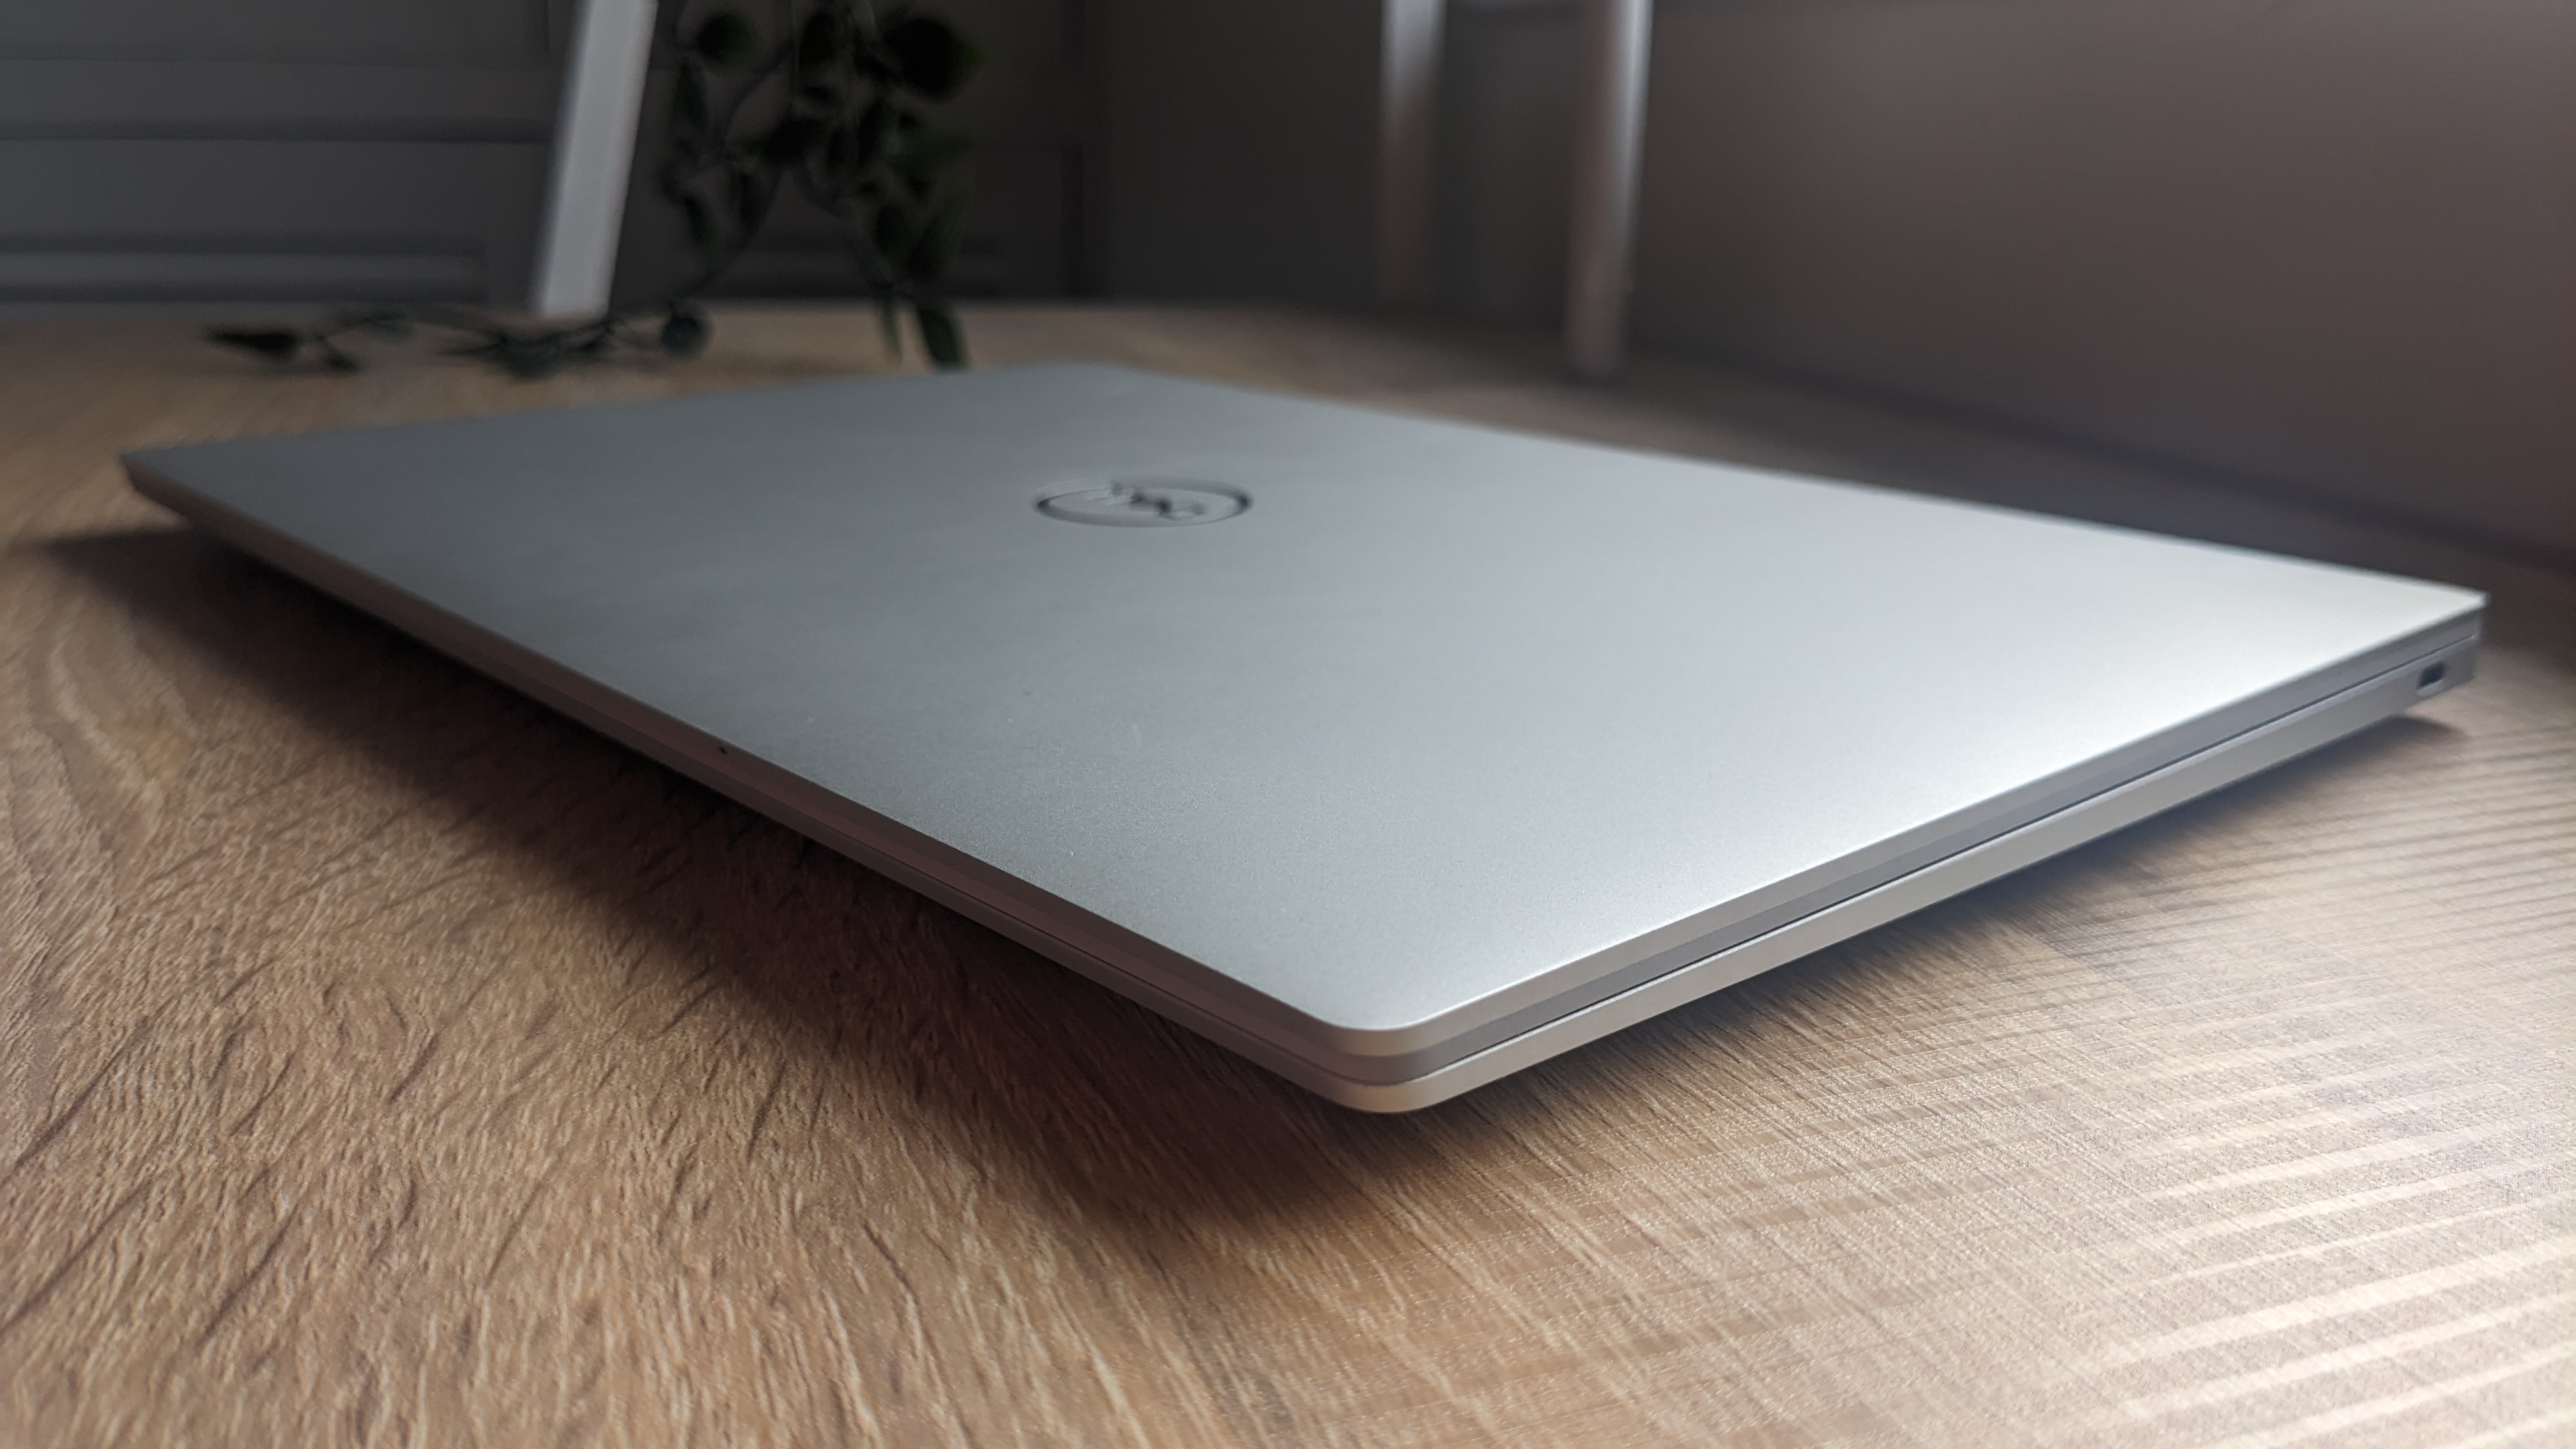 The Dell XPS 13 Plus photographed on a wooden desk.